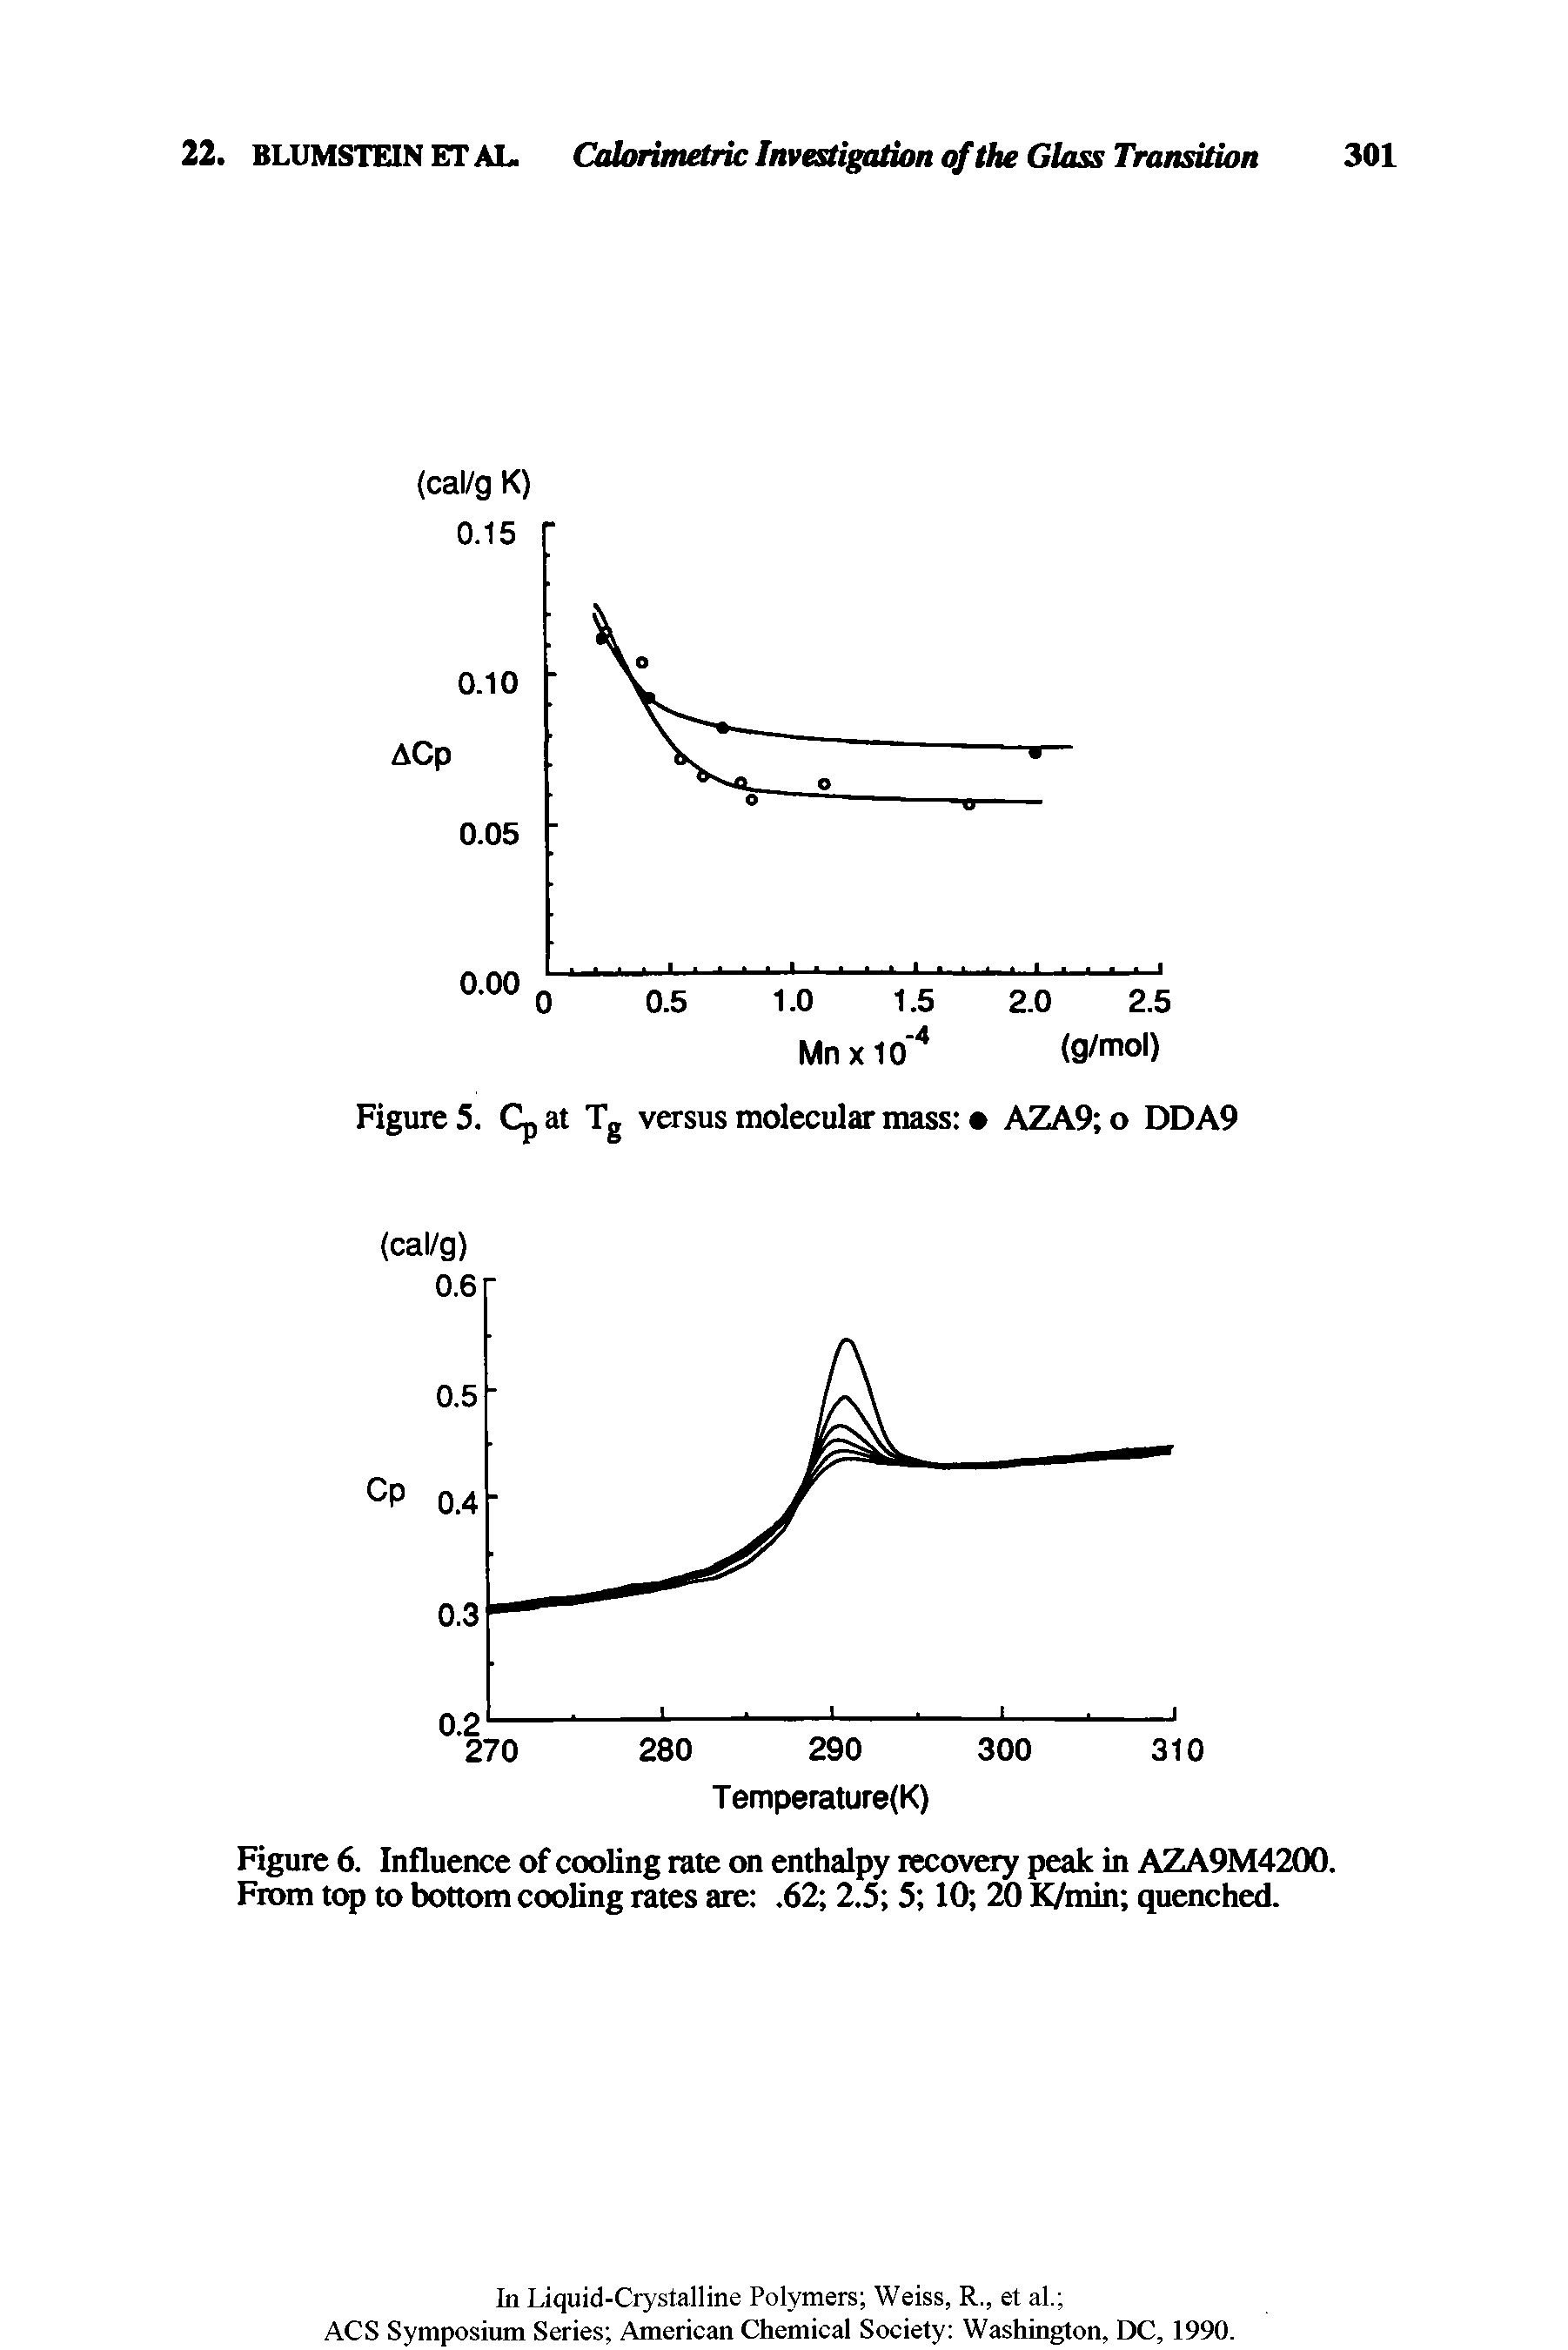 Figure 6. Influence of cooling rate on enthalpy recovery peak in AZA9M4200. From top to bottom cooling rates are . 62 2.5 5 10 20 K/min quenched.